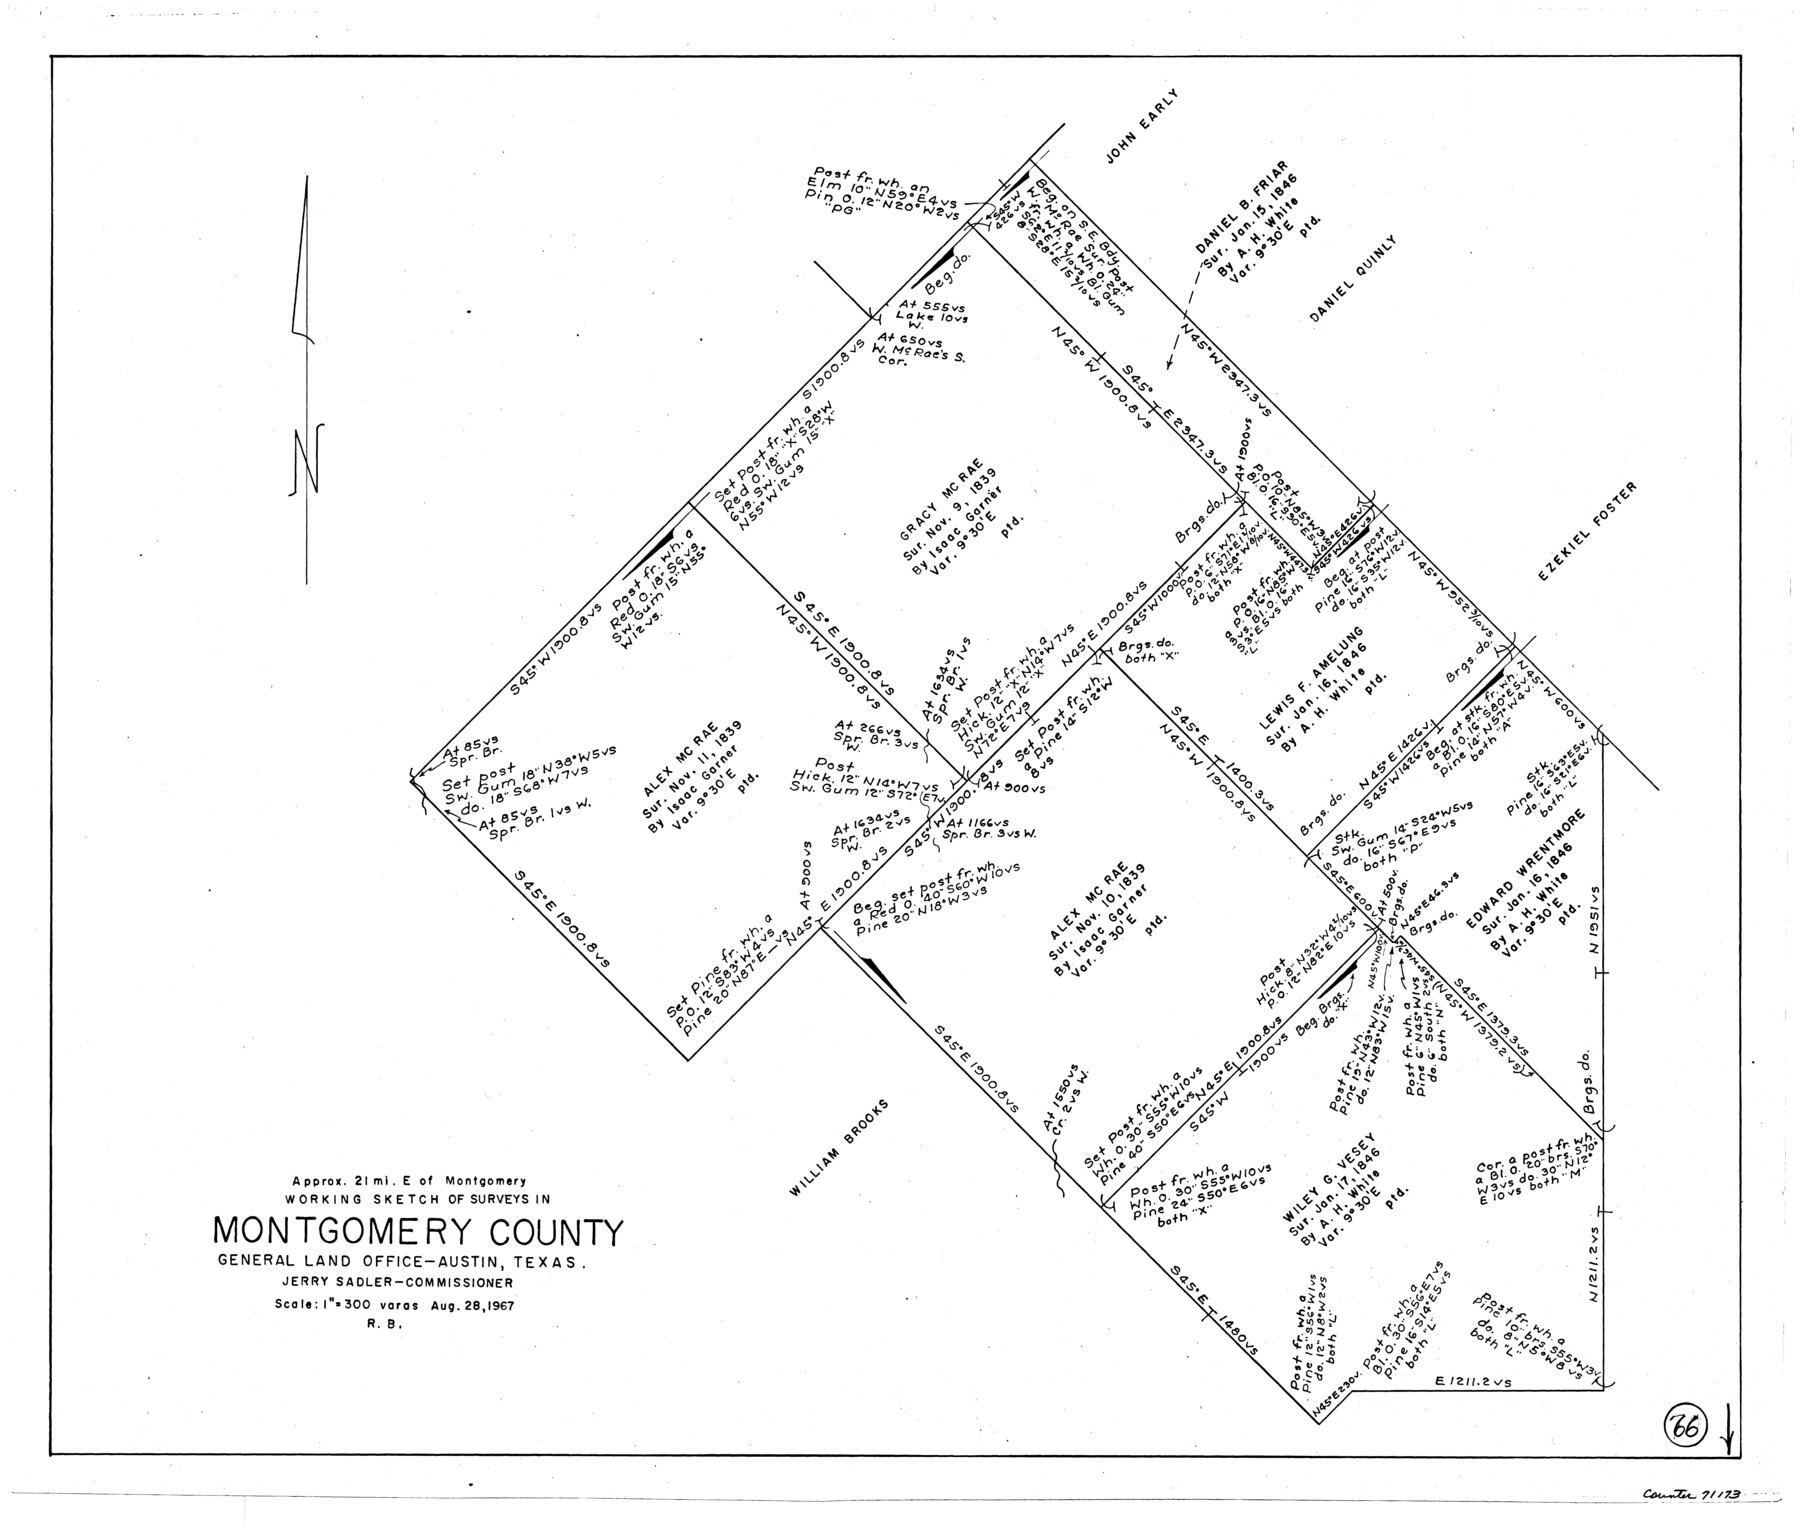 71173, Montgomery County Working Sketch 66, General Map Collection